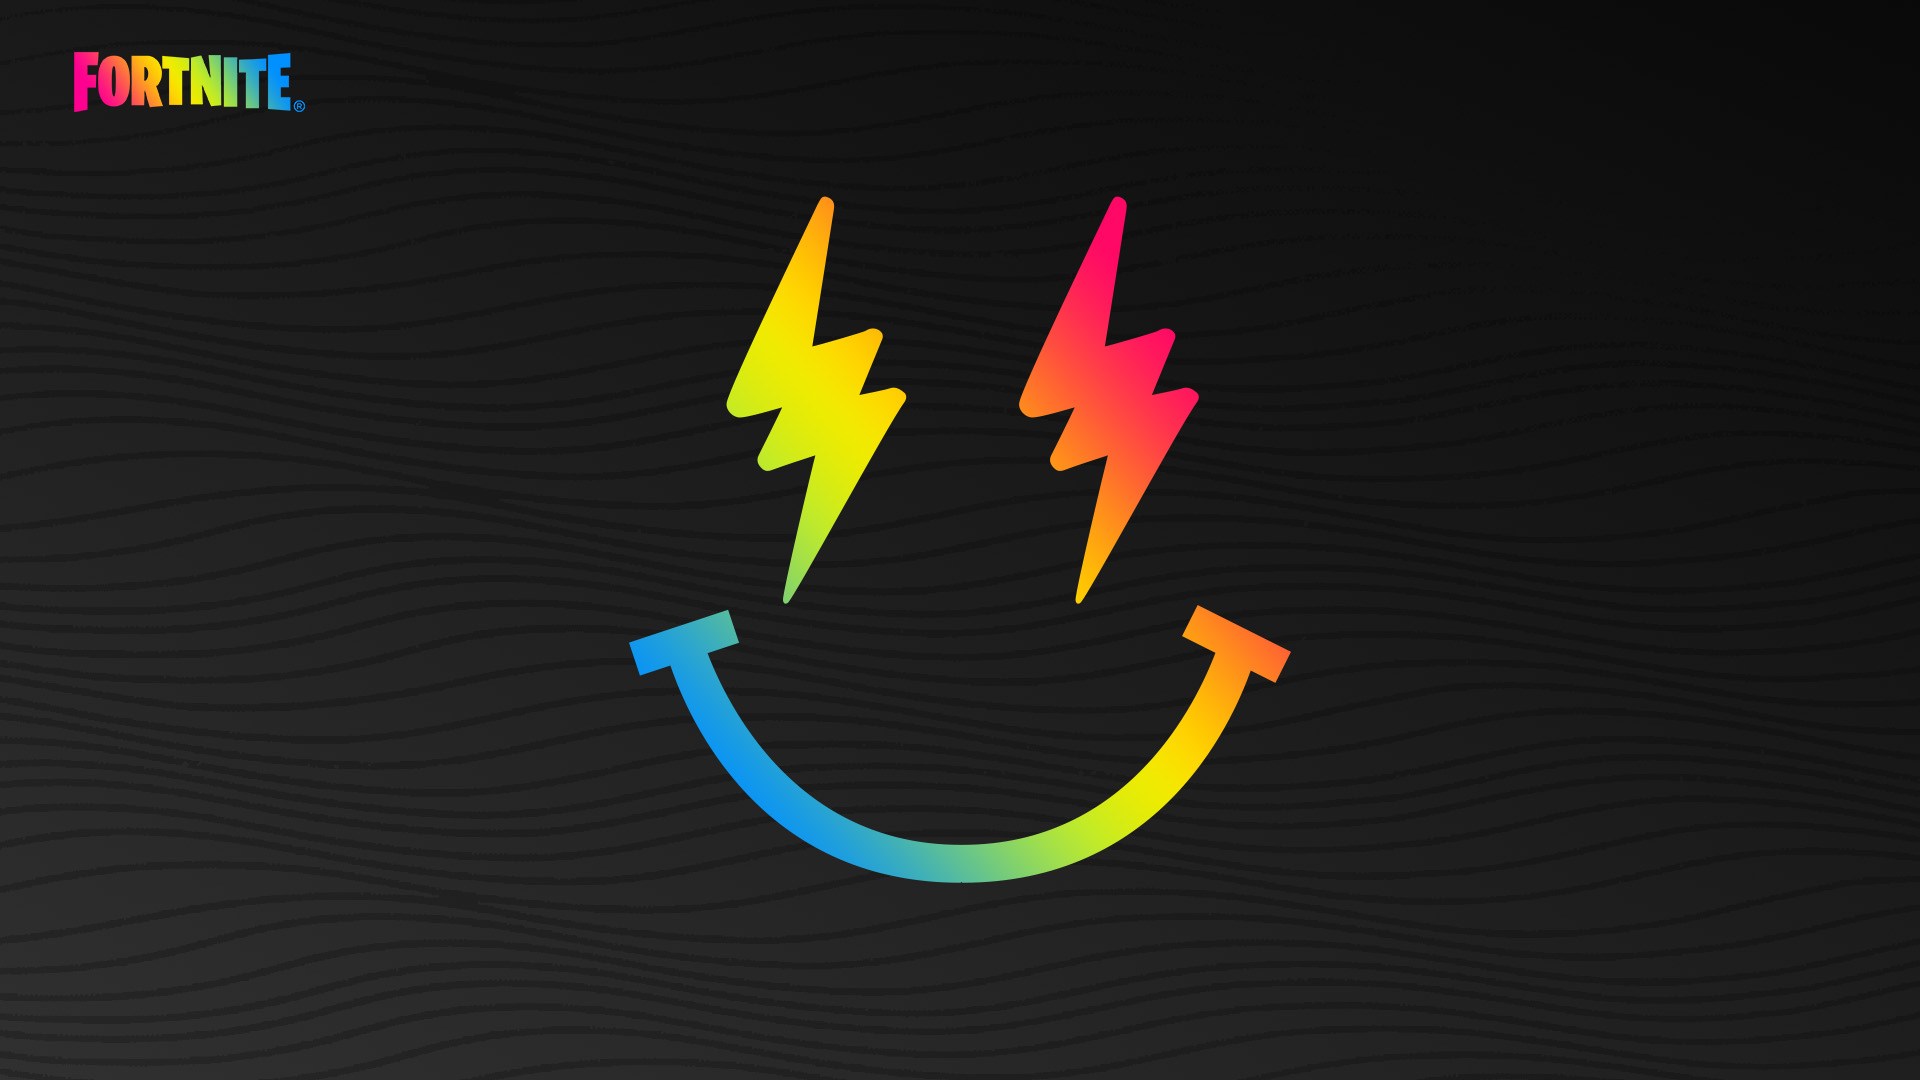 A smiley face with lightning bolts for eyes in a rainbow color - a symbol associated with J Balvin